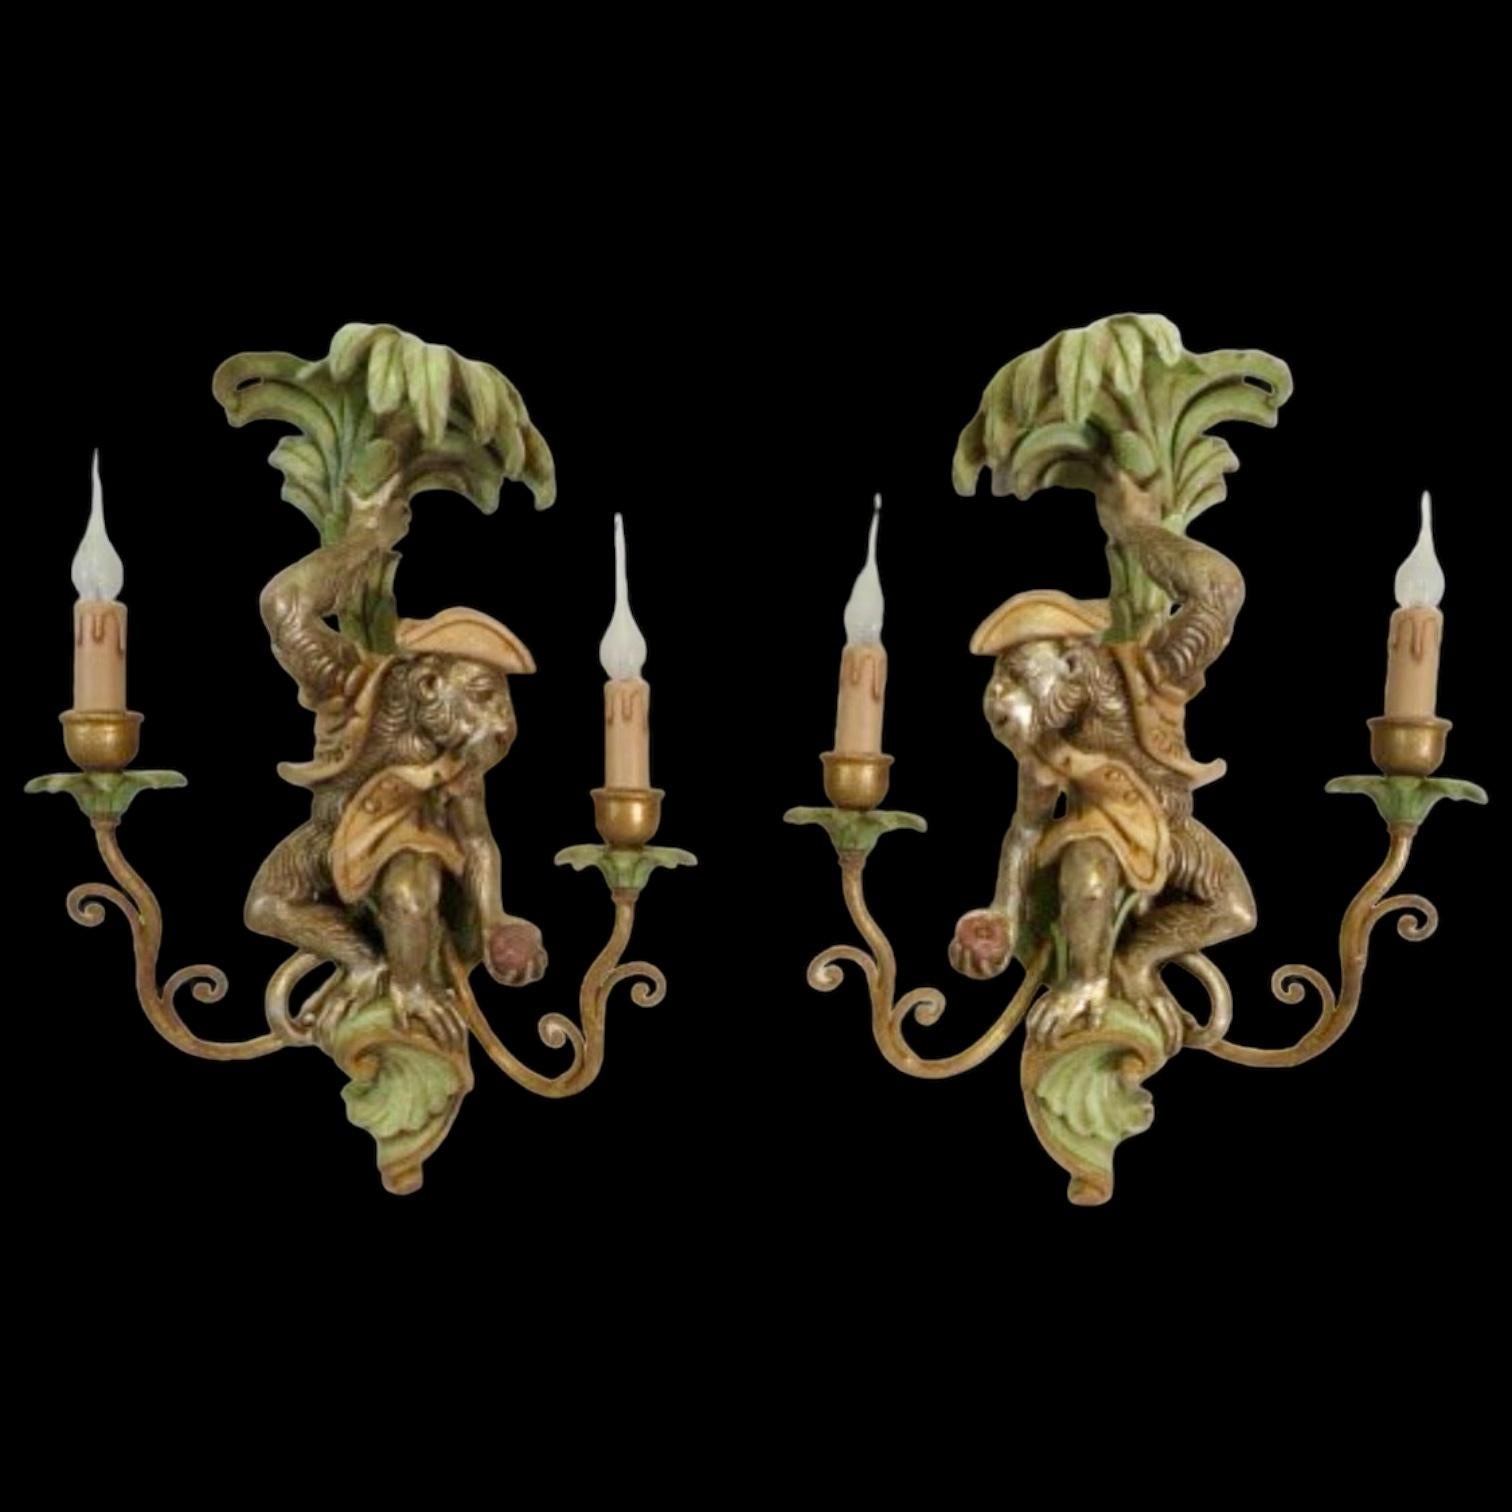 20th Century Decorative Crafts Italian Regency Style Carved Wood Monkey Palm Tree Sconces -2 For Sale